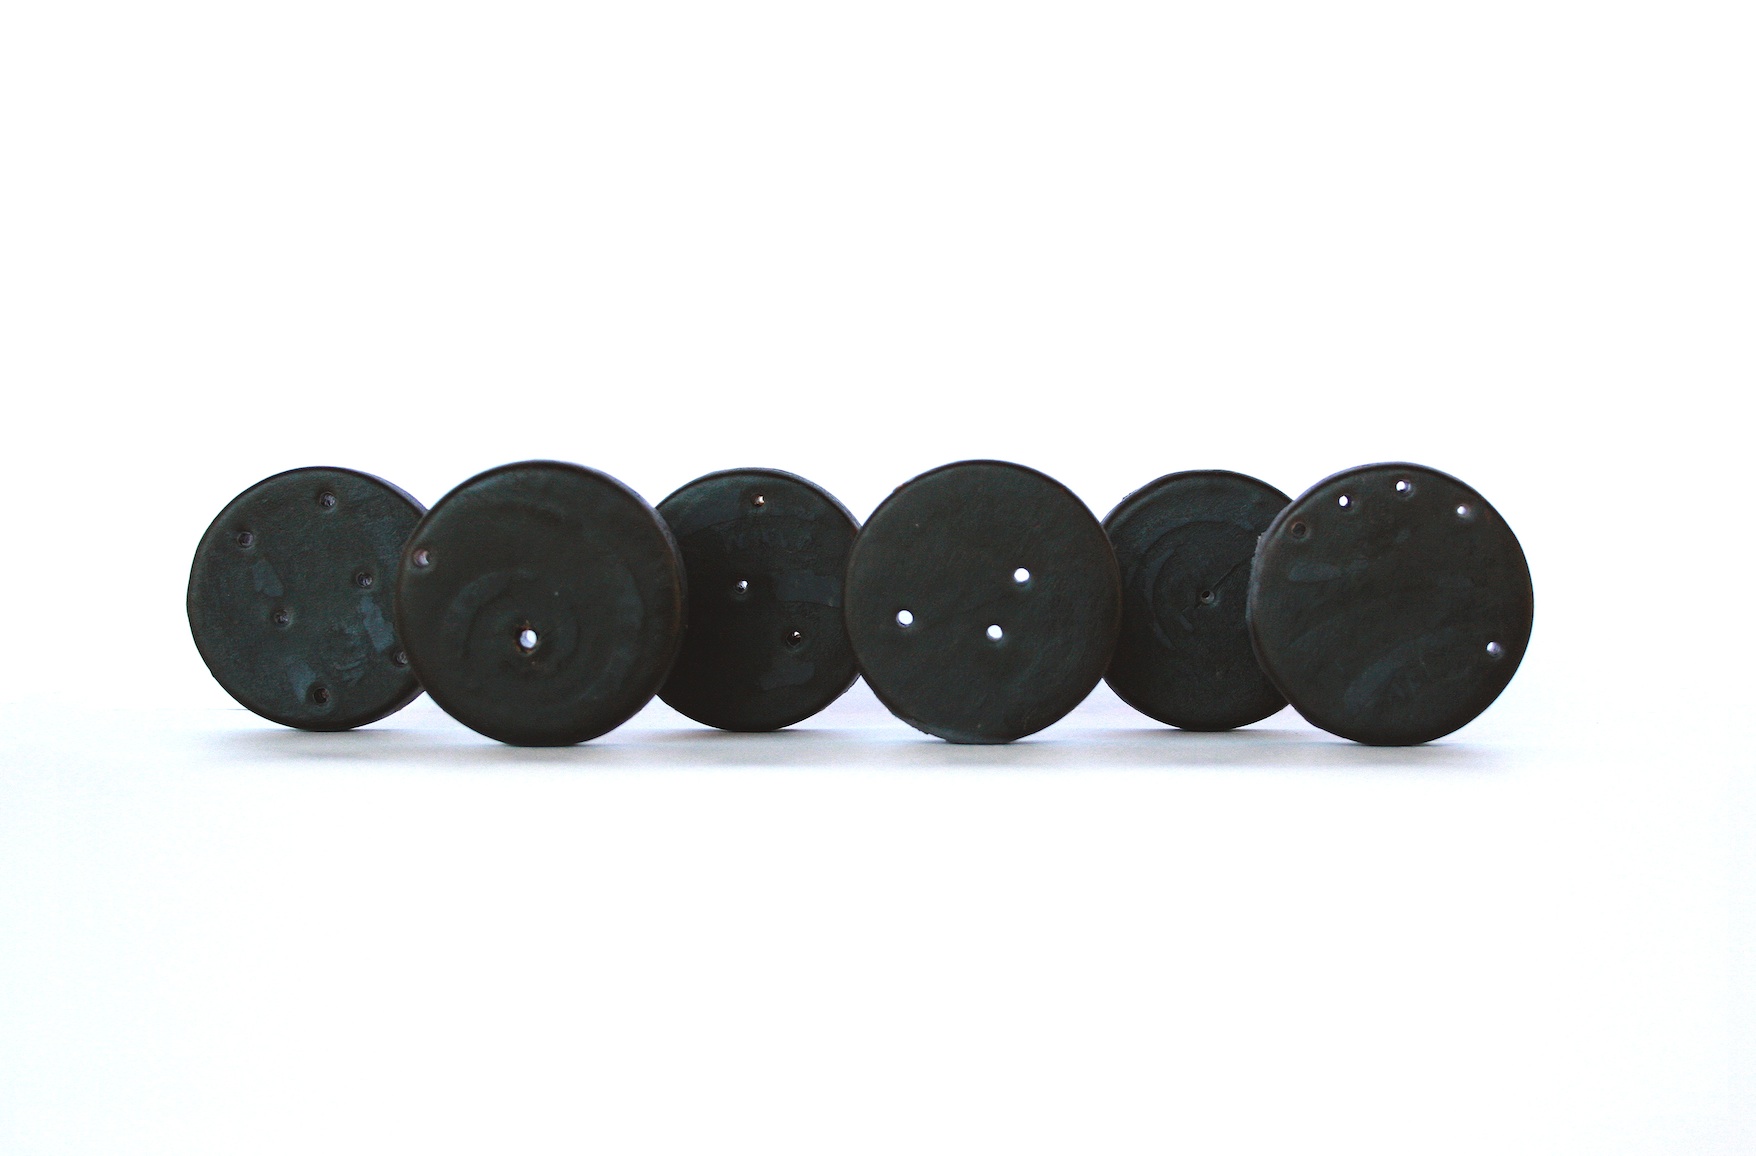  Christine Kettaneh,  Soap Coins , post-side2, laser-engraving on soap, 2014. 